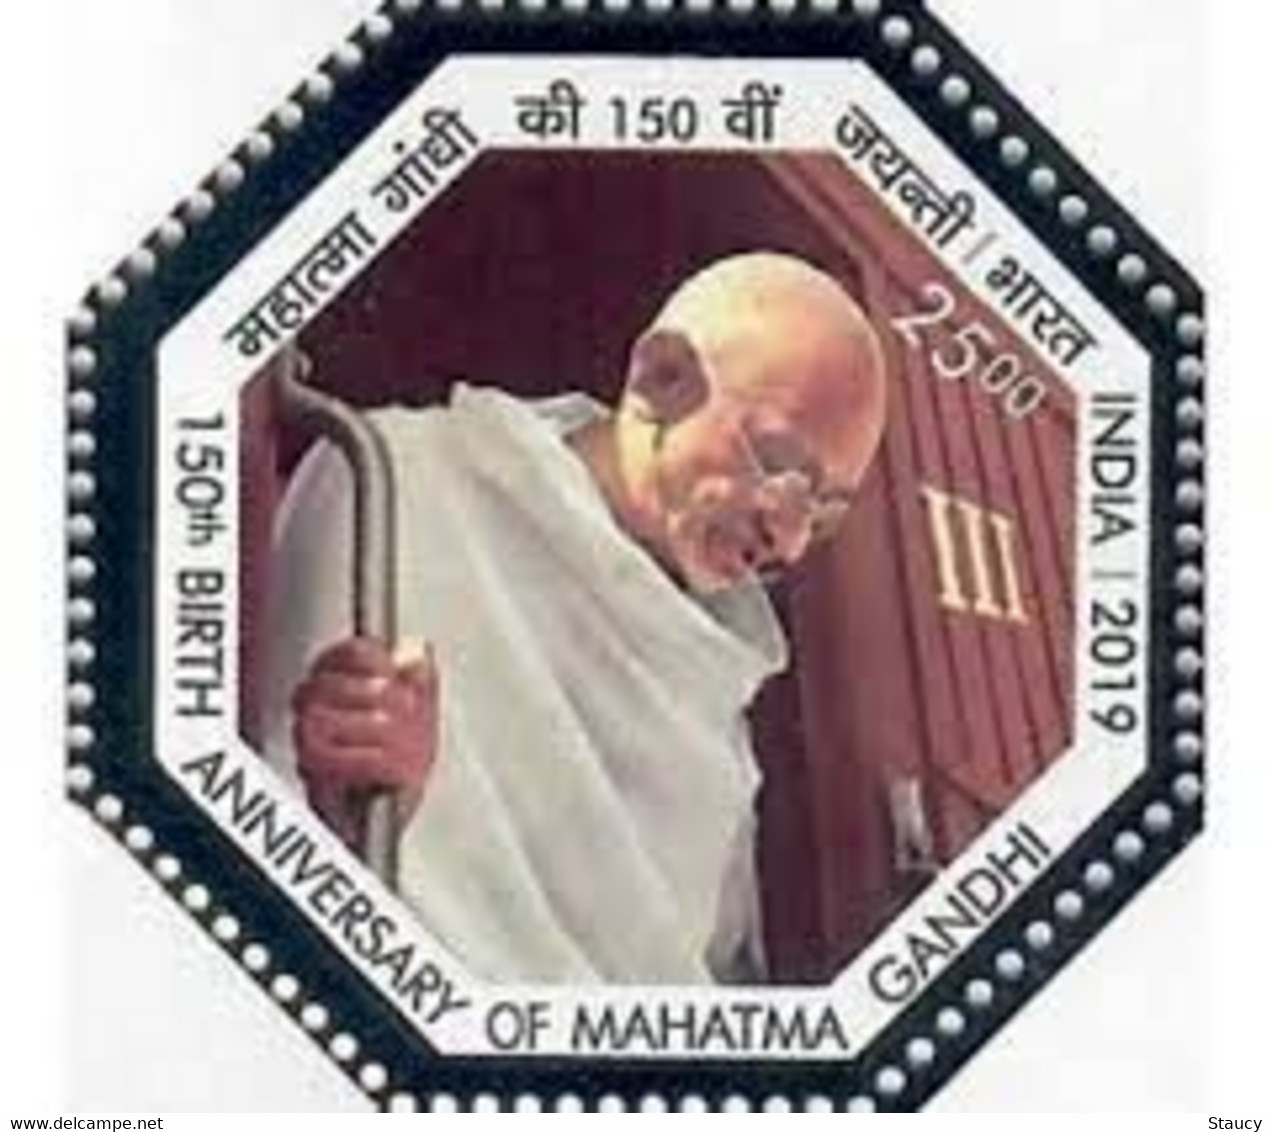 INDIA 2019 150th Birth Anniversary Of Mahatma Gandhi (Octagonal Silver Bordered) Rs.25.00 1v STAMP MNH P.O Fresh&Fine - Oddities On Stamps